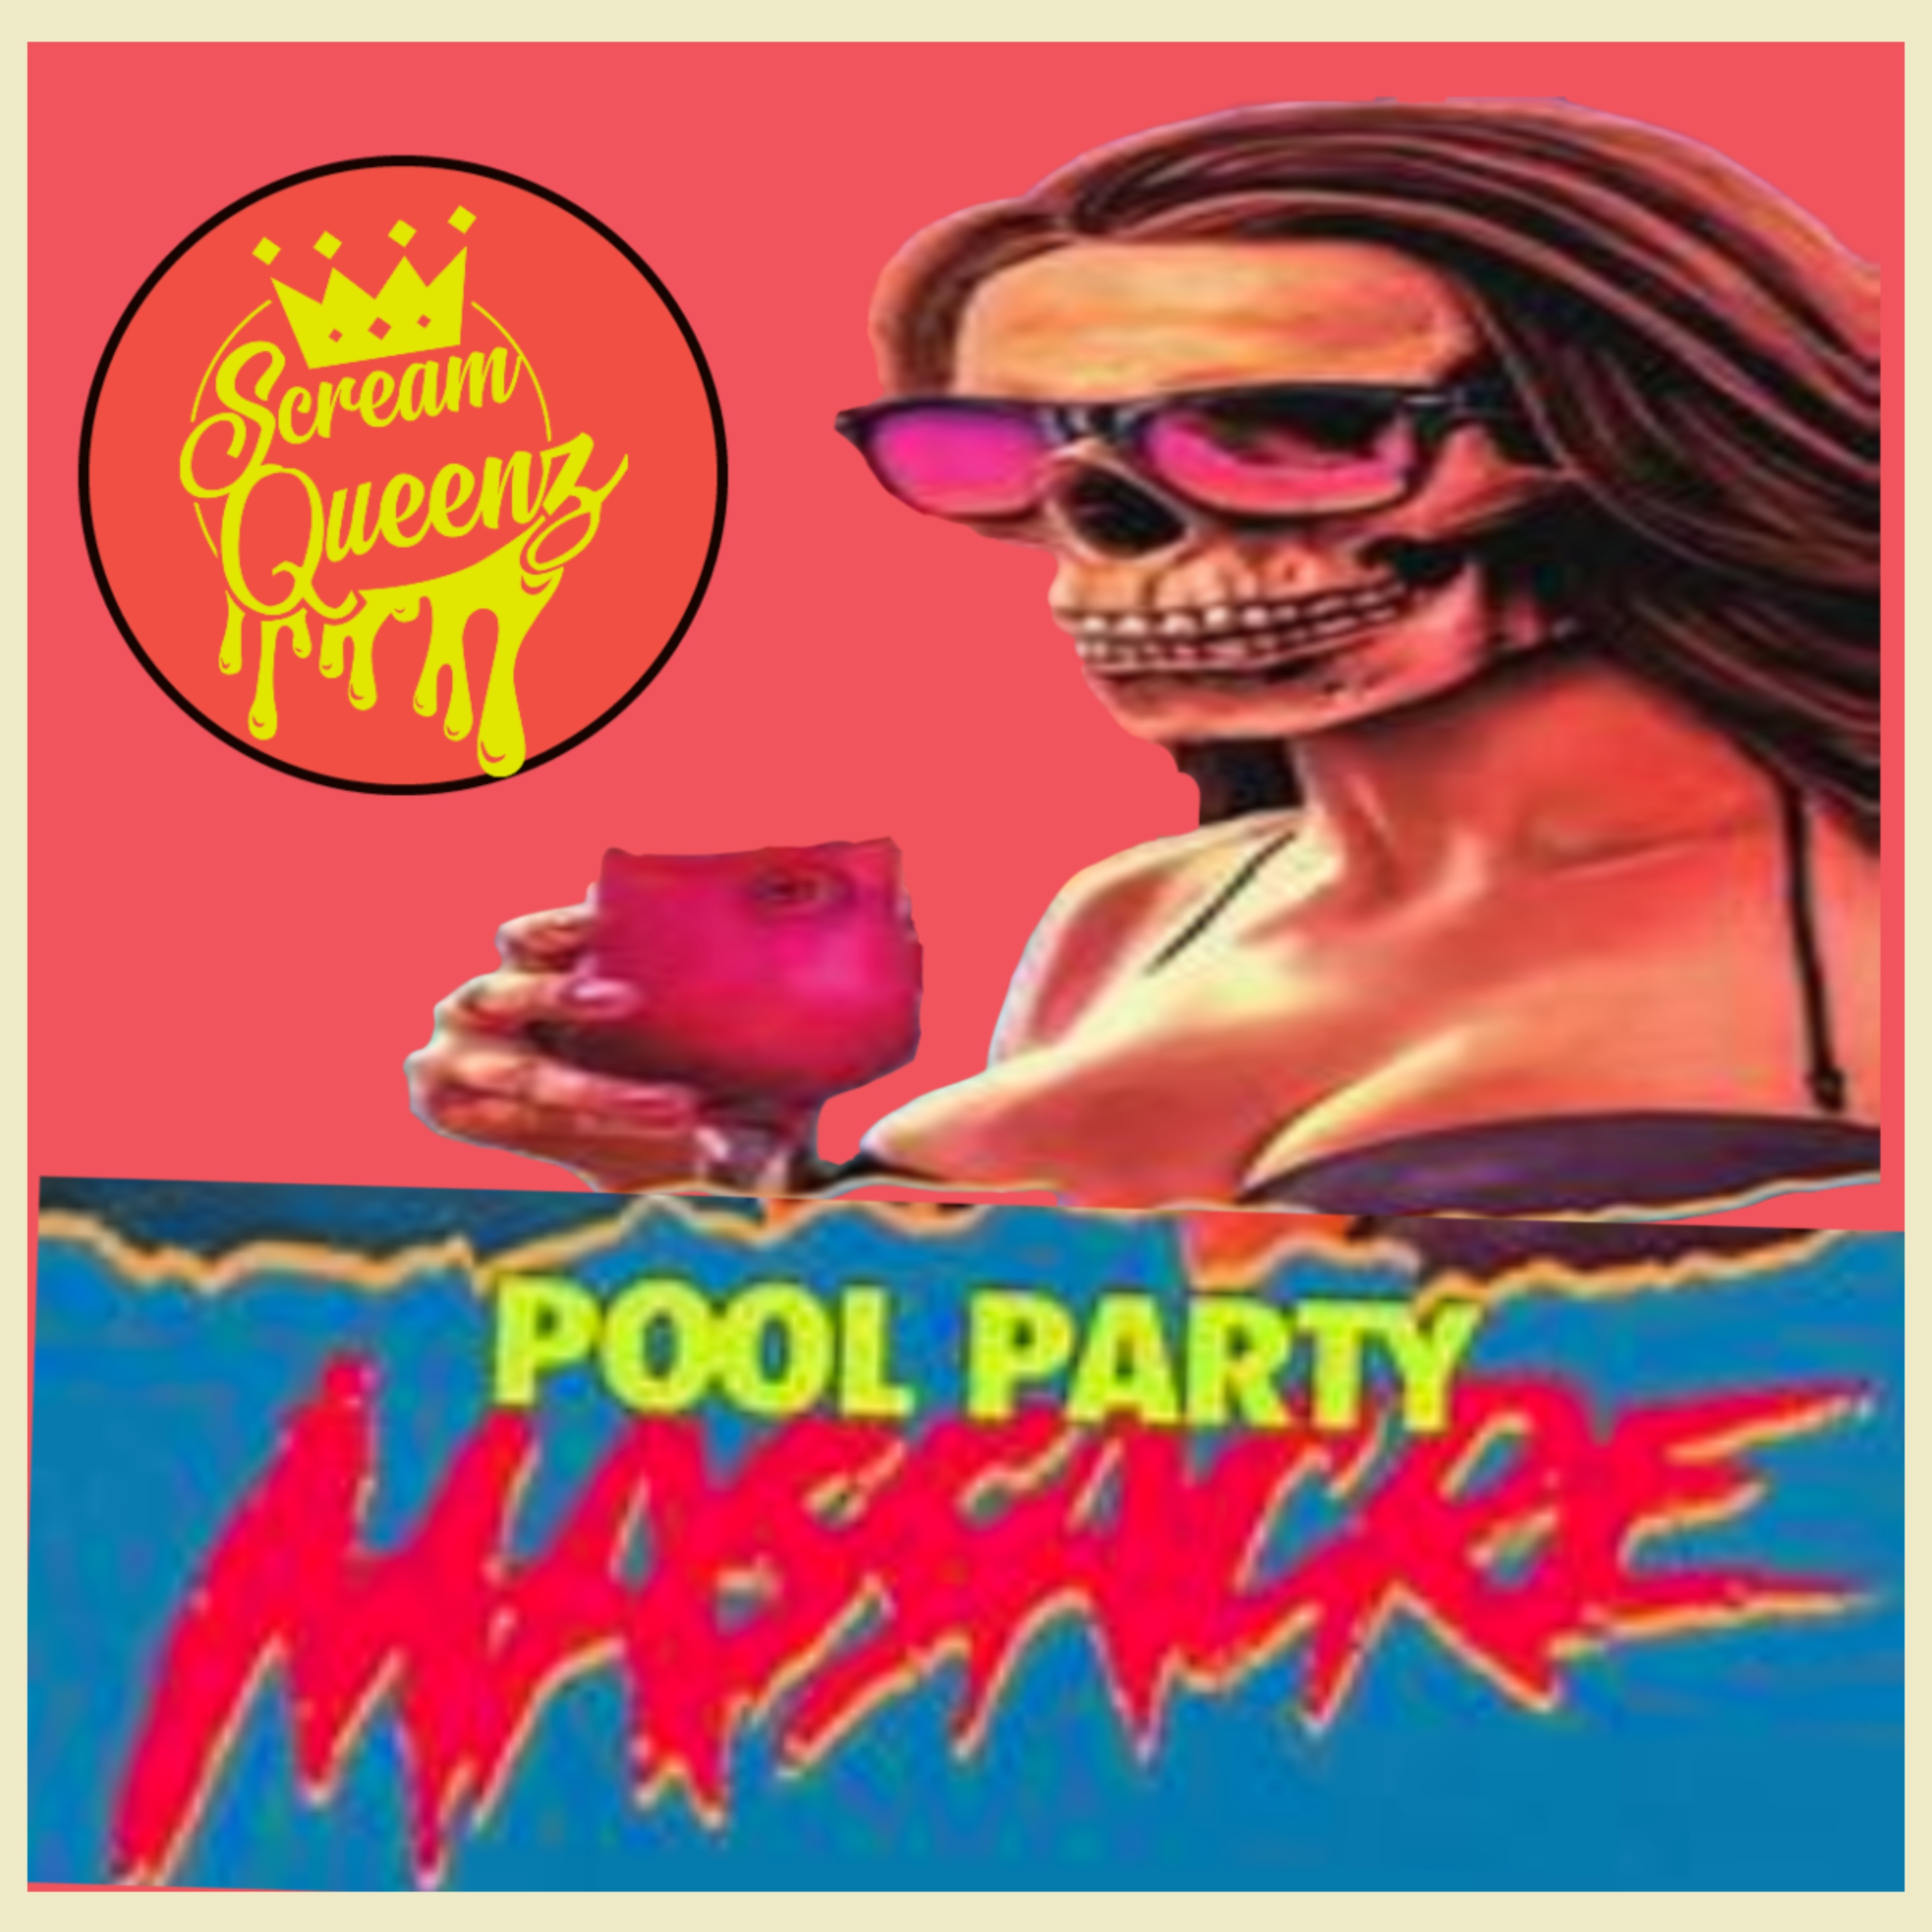 Enjoy this Free Episode of  THE FINAL REEl: A Patreon Premium Podcast - "The Car" (1977) * "Pool Party Massacre" (2017)